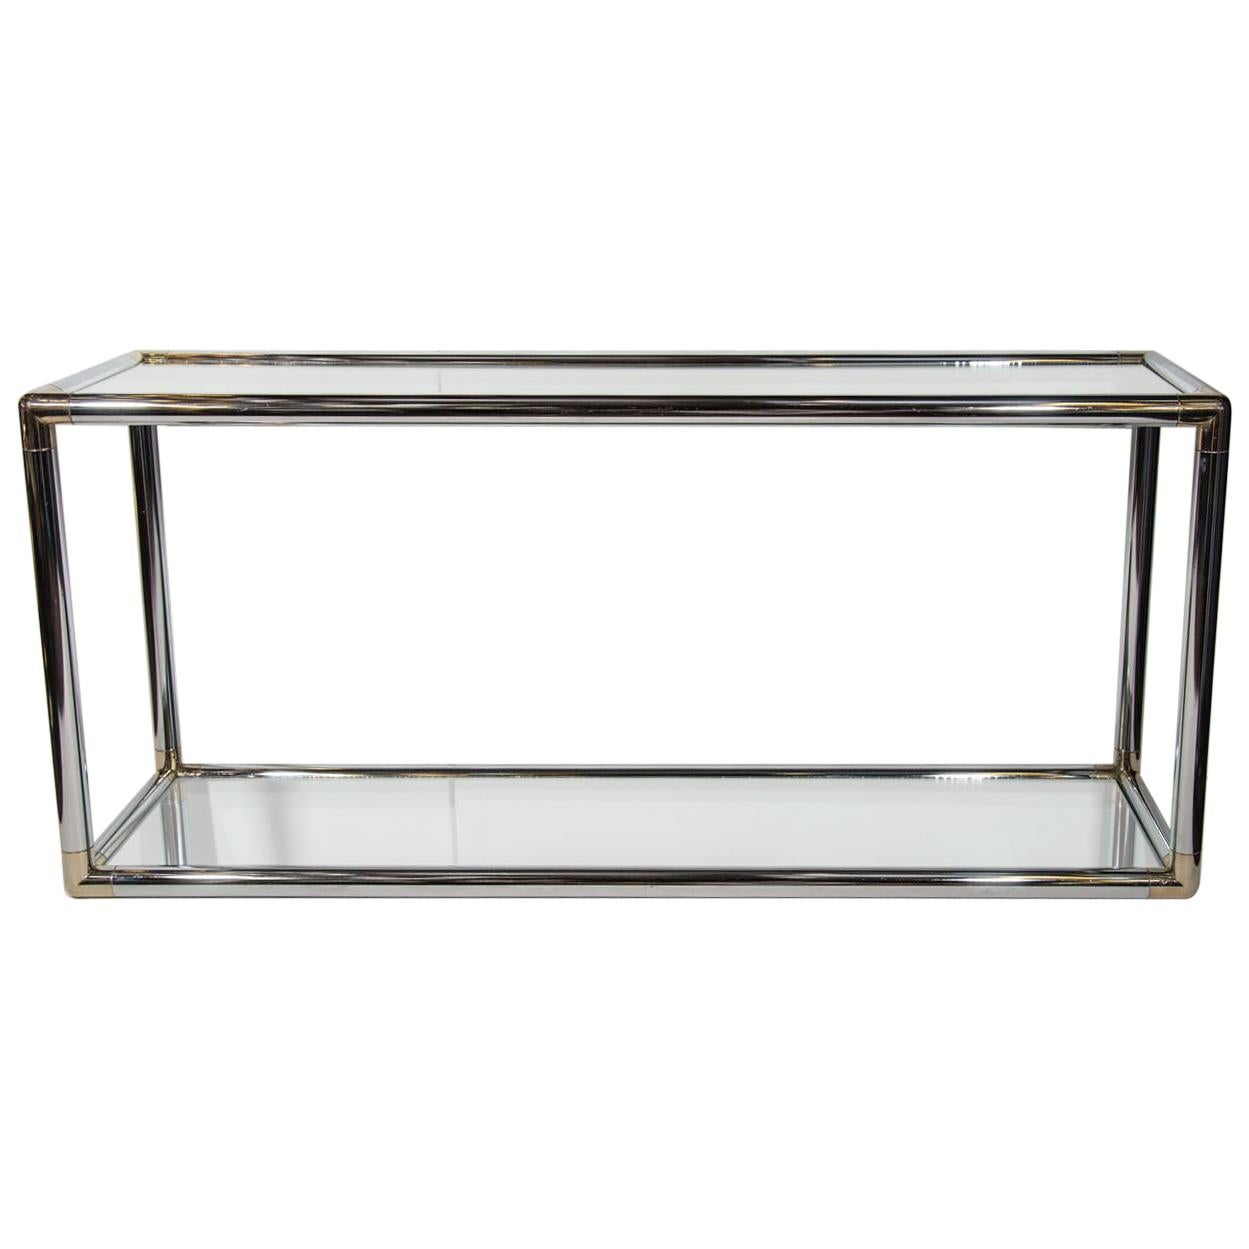 Italian Mid-Century Modern console table or sofa table with two-tier design. Comprised of tubular chrome frame with rounded brass corners, and fitted with mirrored tops. In the style of Romeo Rega.